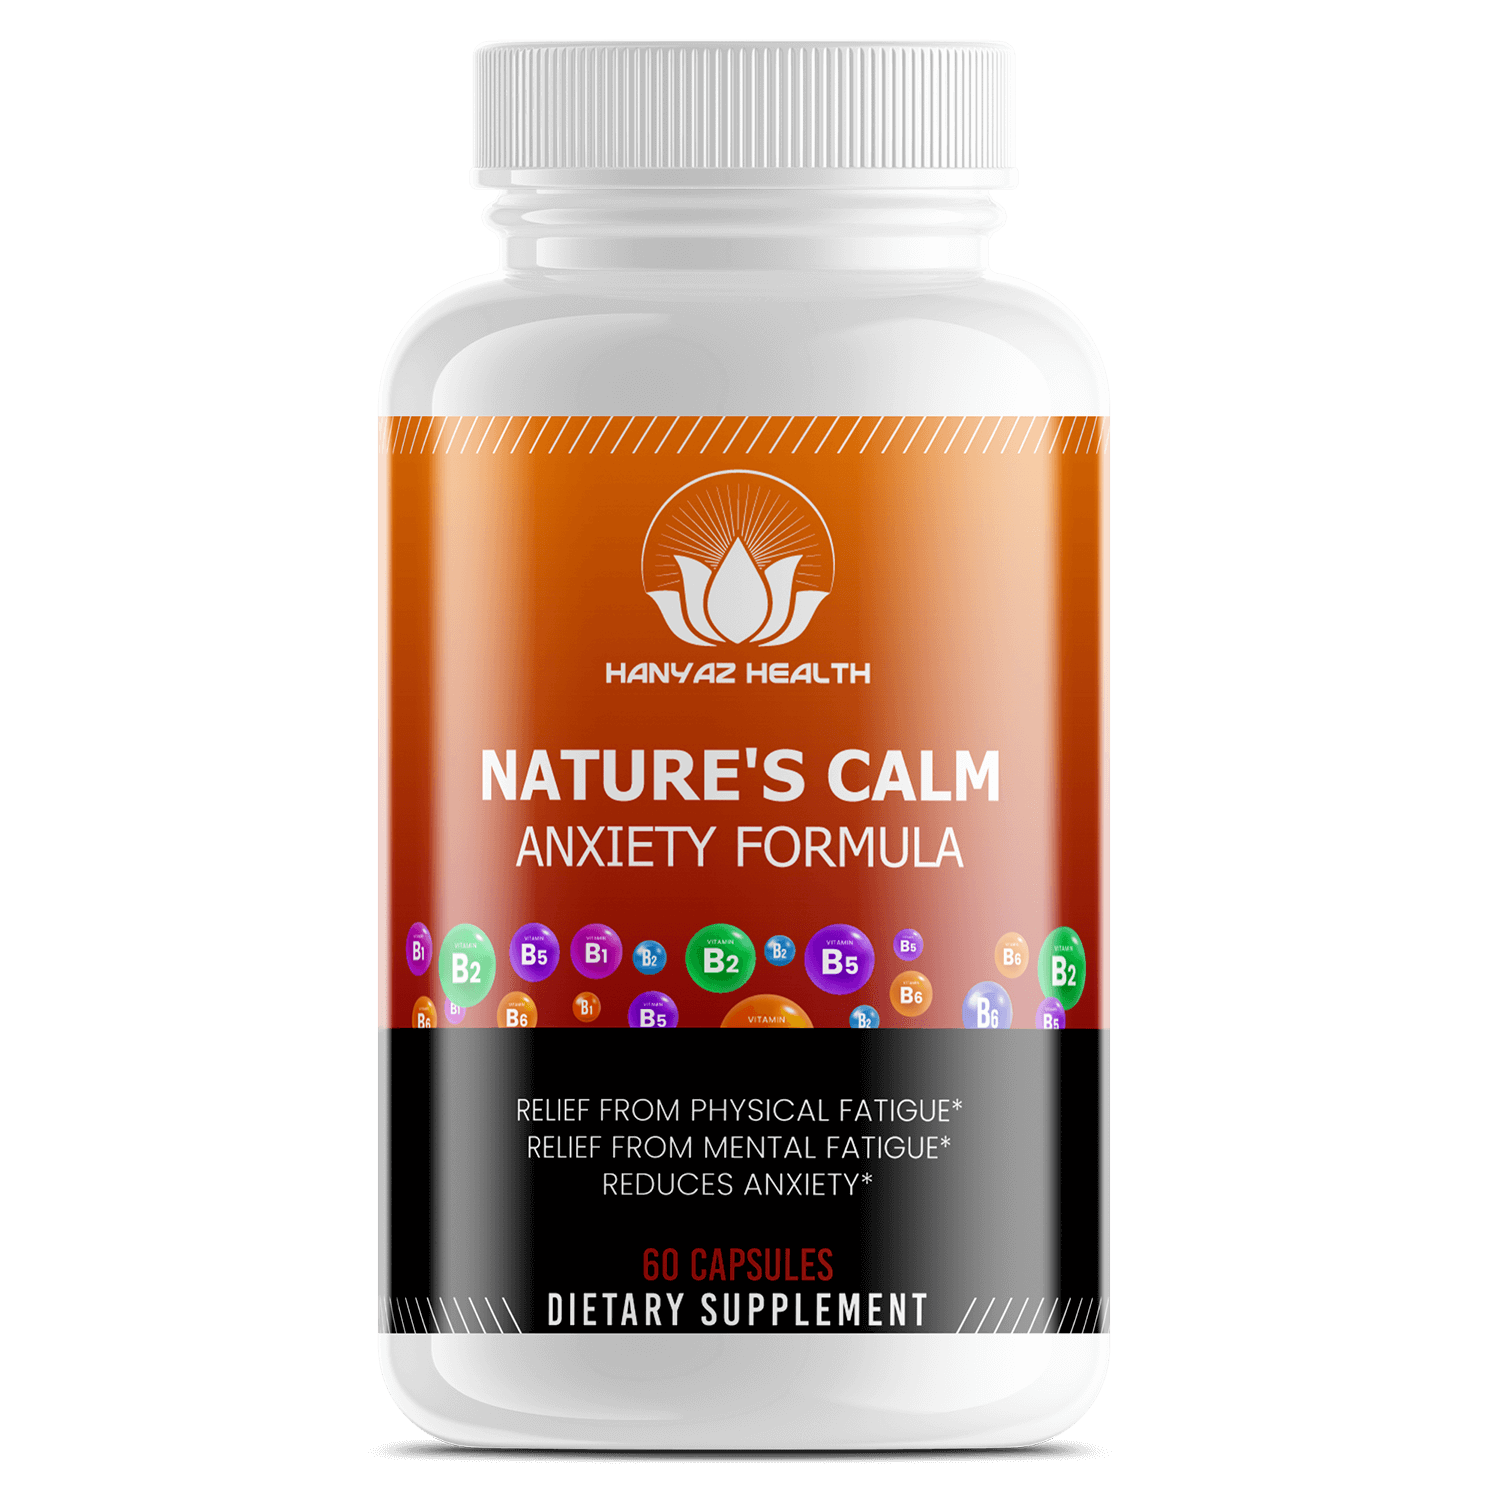 Nature’s Calm Anxiety Formula